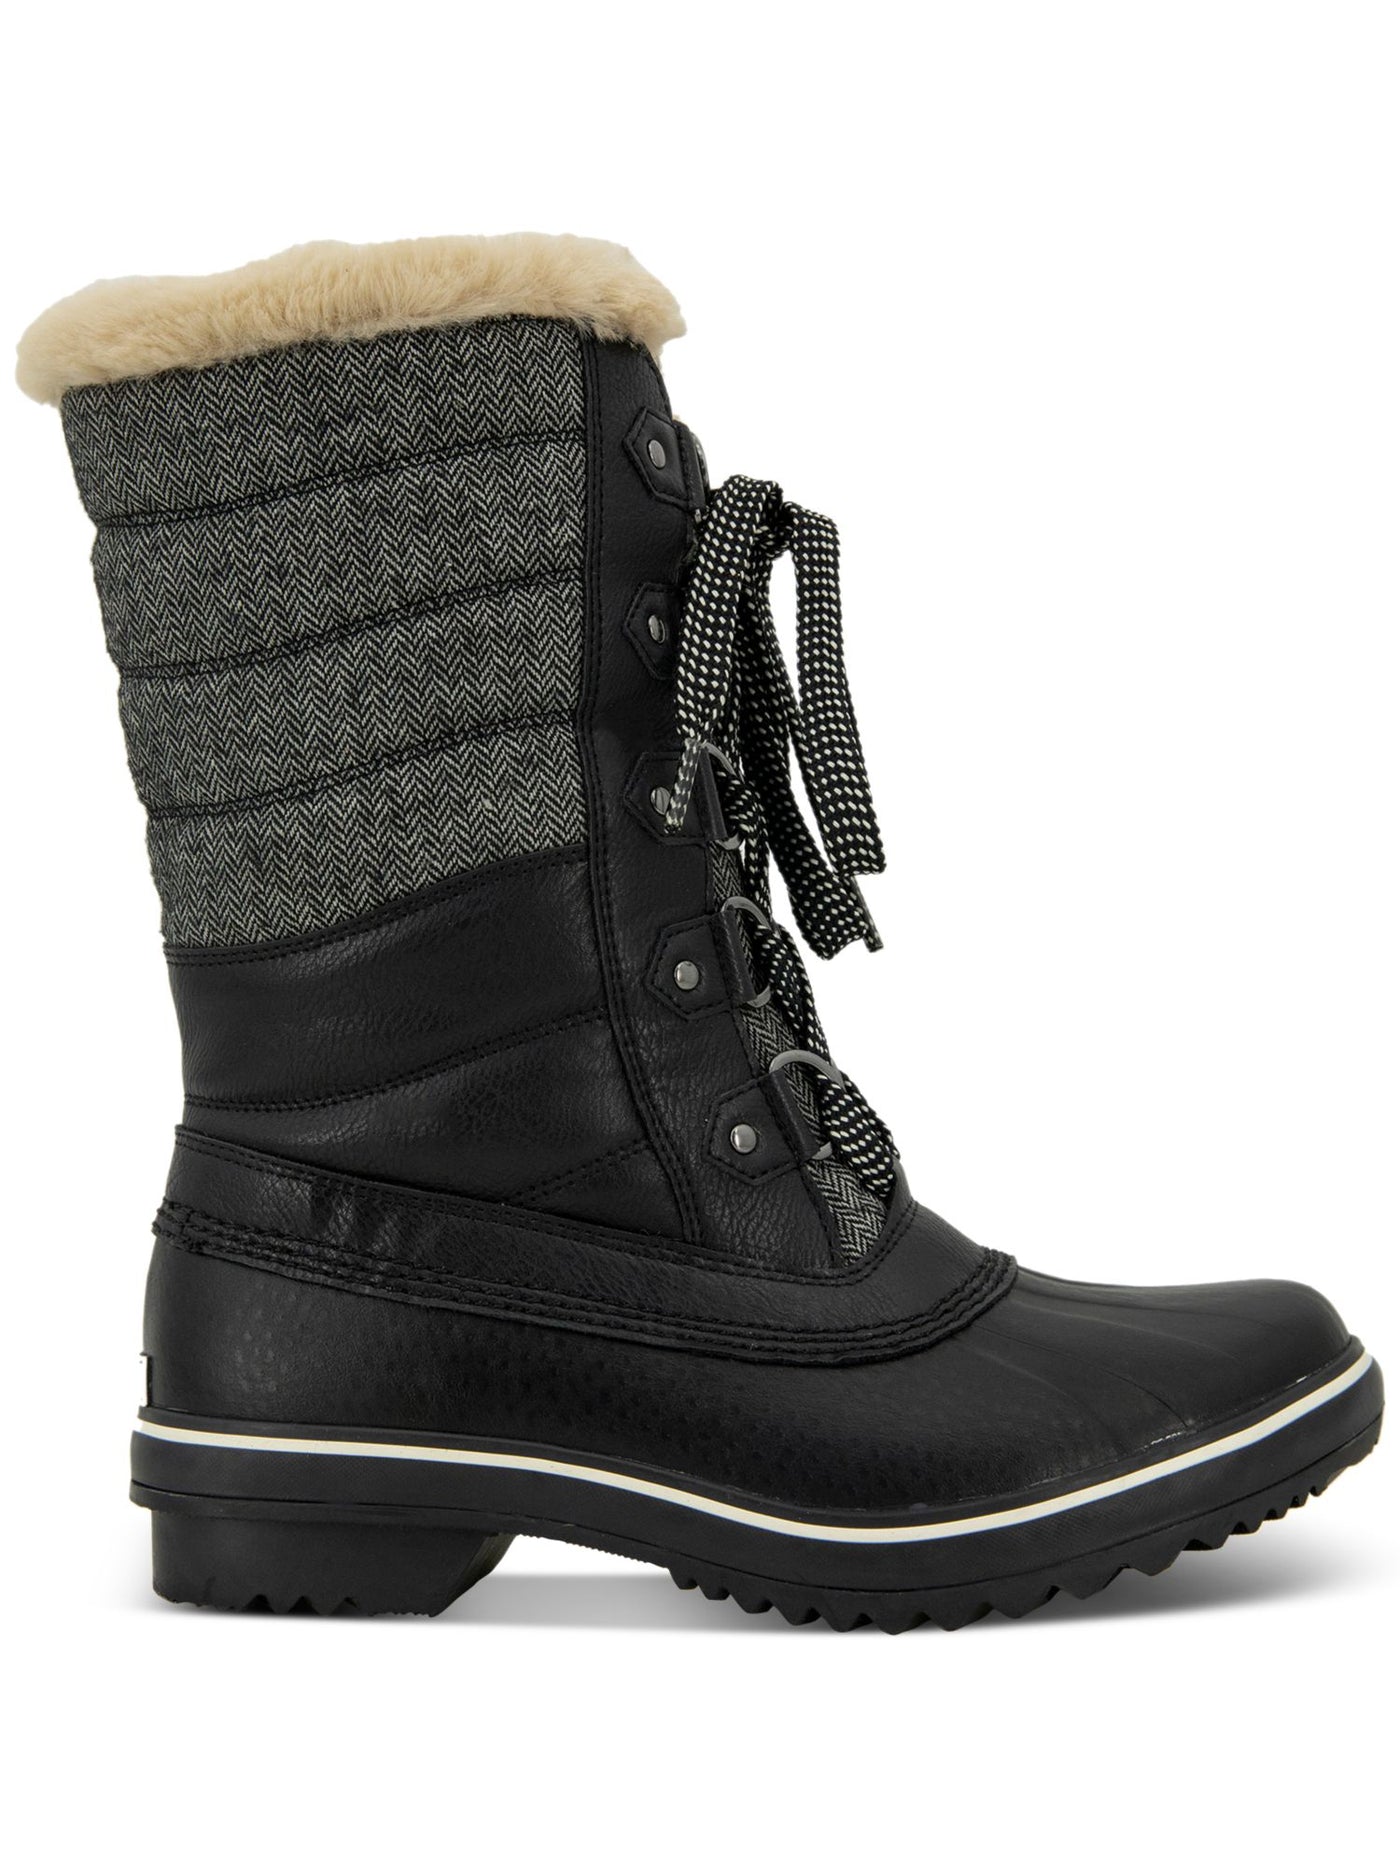 JBU BY JAMBU Womens Black Water Resistant Quilted Siberia Round Toe Lace-Up Winter 11